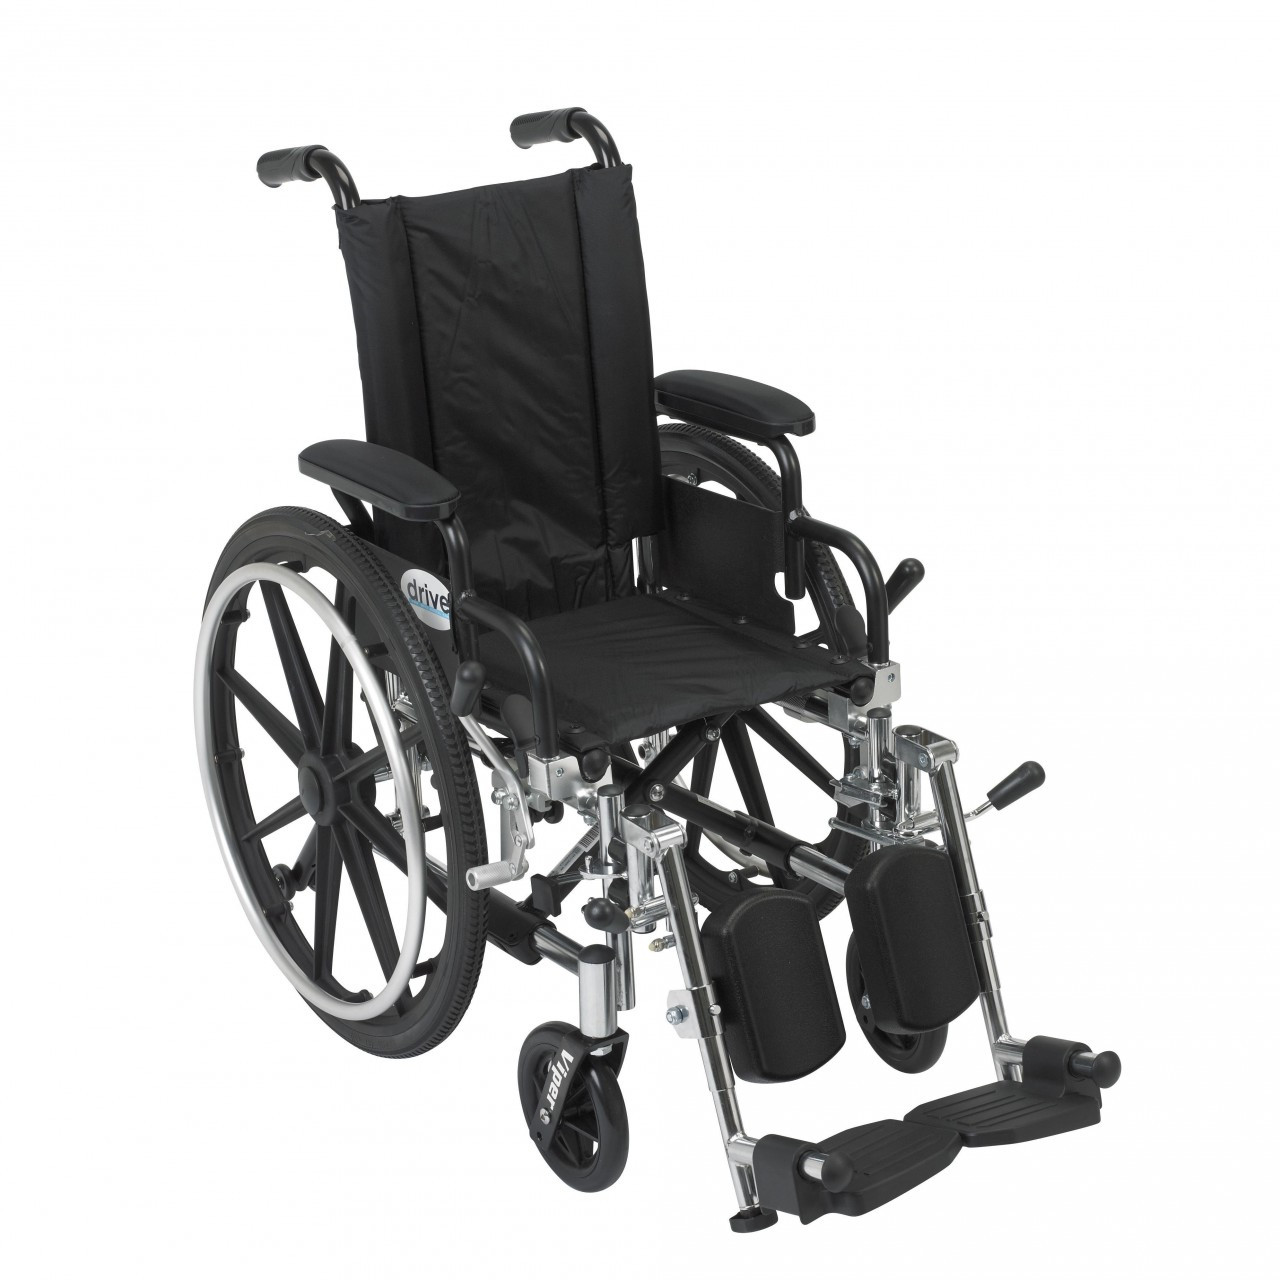 Junior Elevating Foot Rest,Tool Free, for Viper Wheelchair JLELR-TF